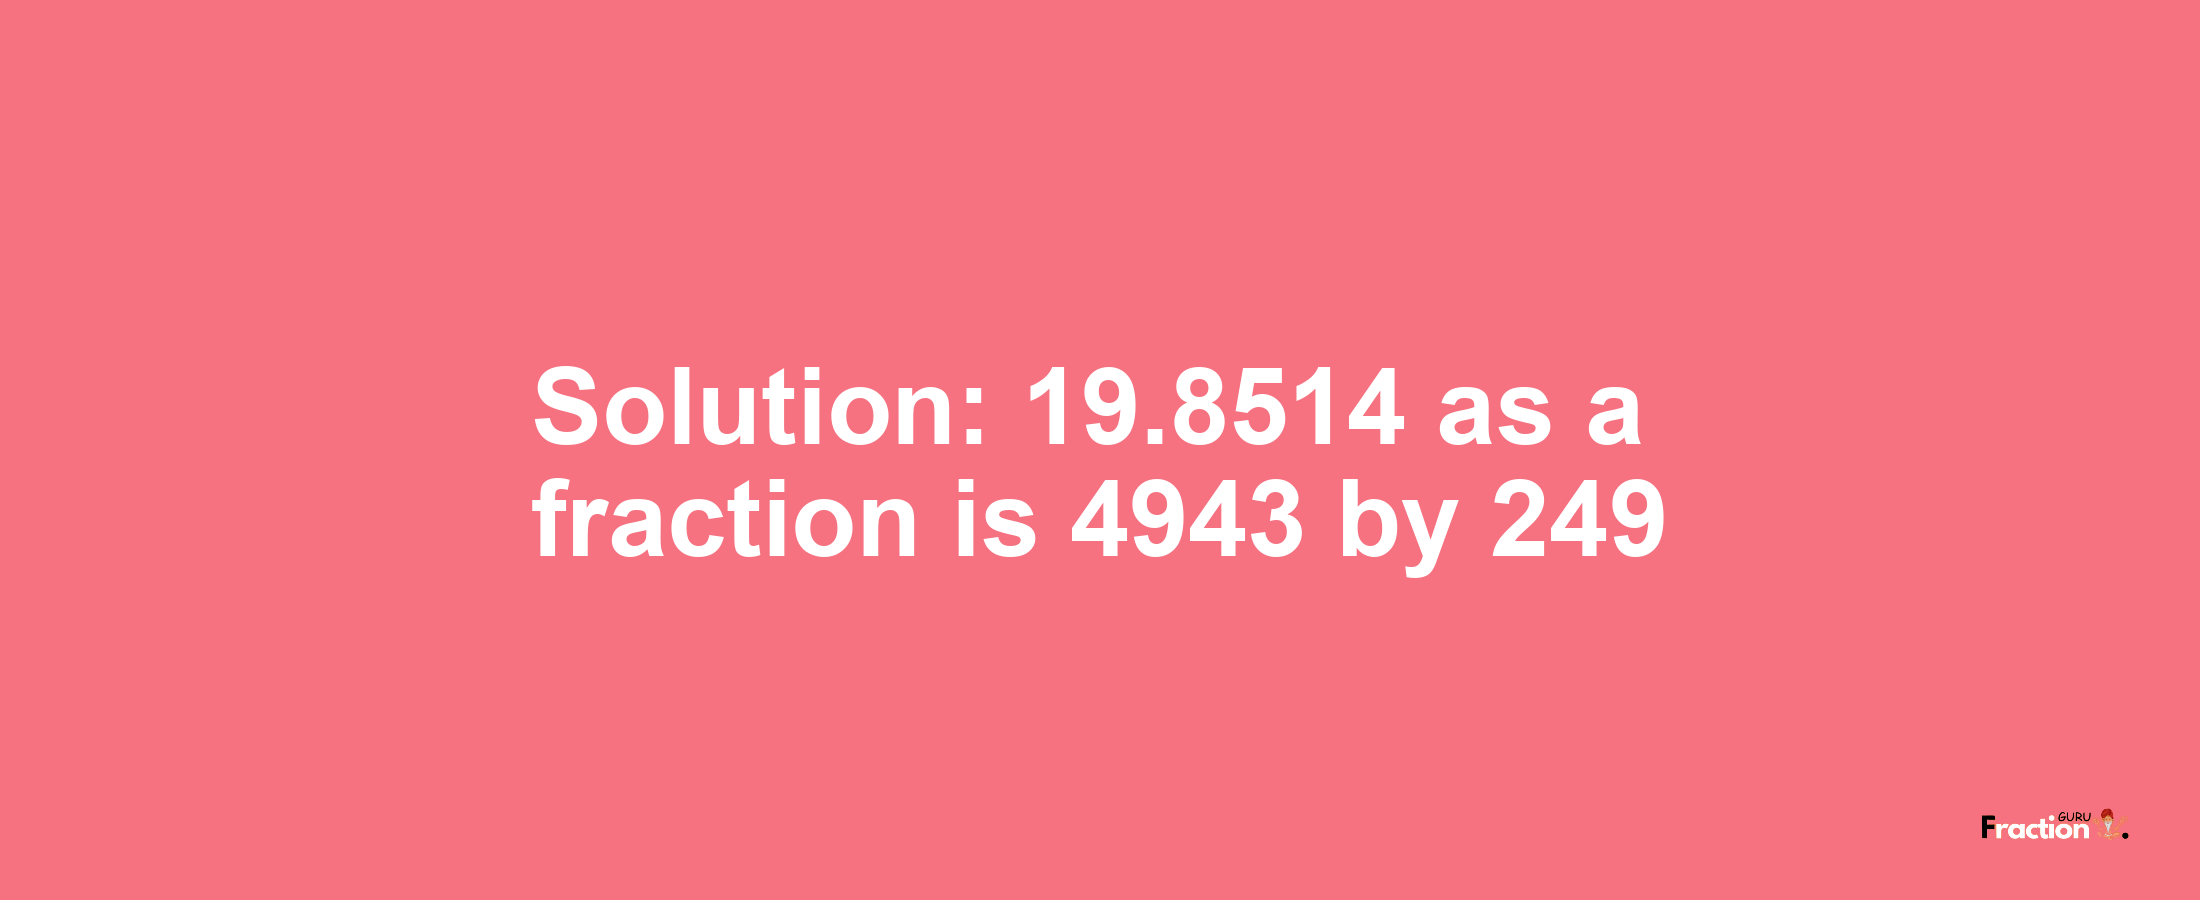 Solution:19.8514 as a fraction is 4943/249